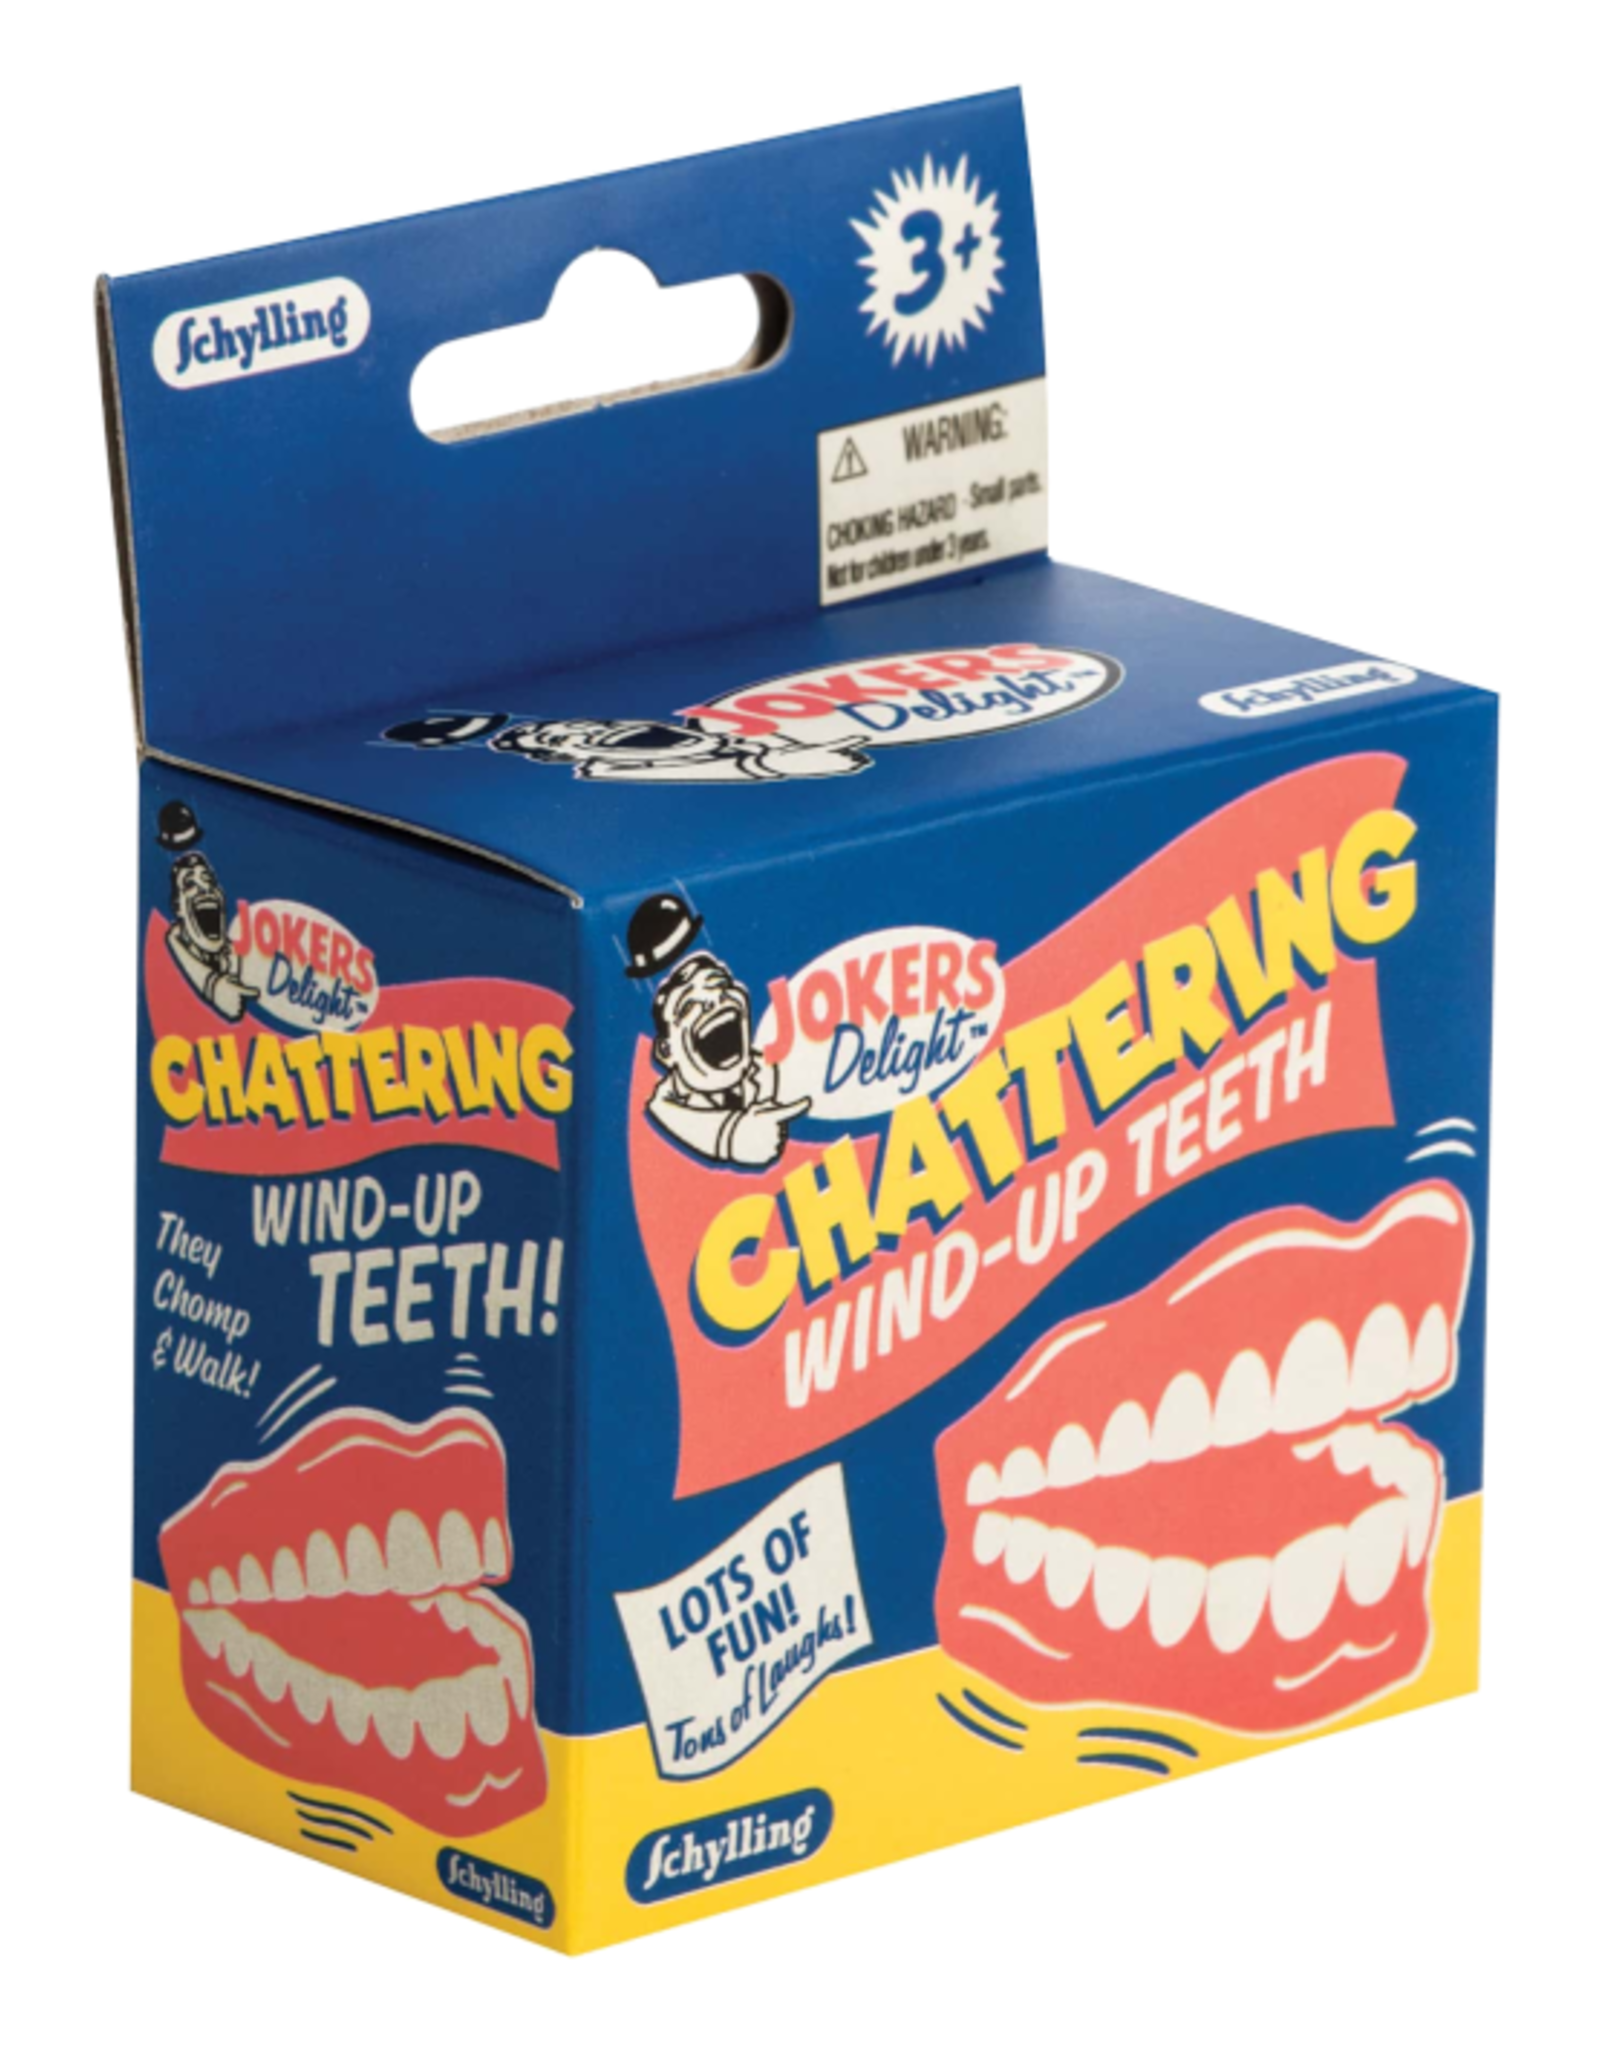 Schylling Jokers Delight - Wind-up Chattering Teeth